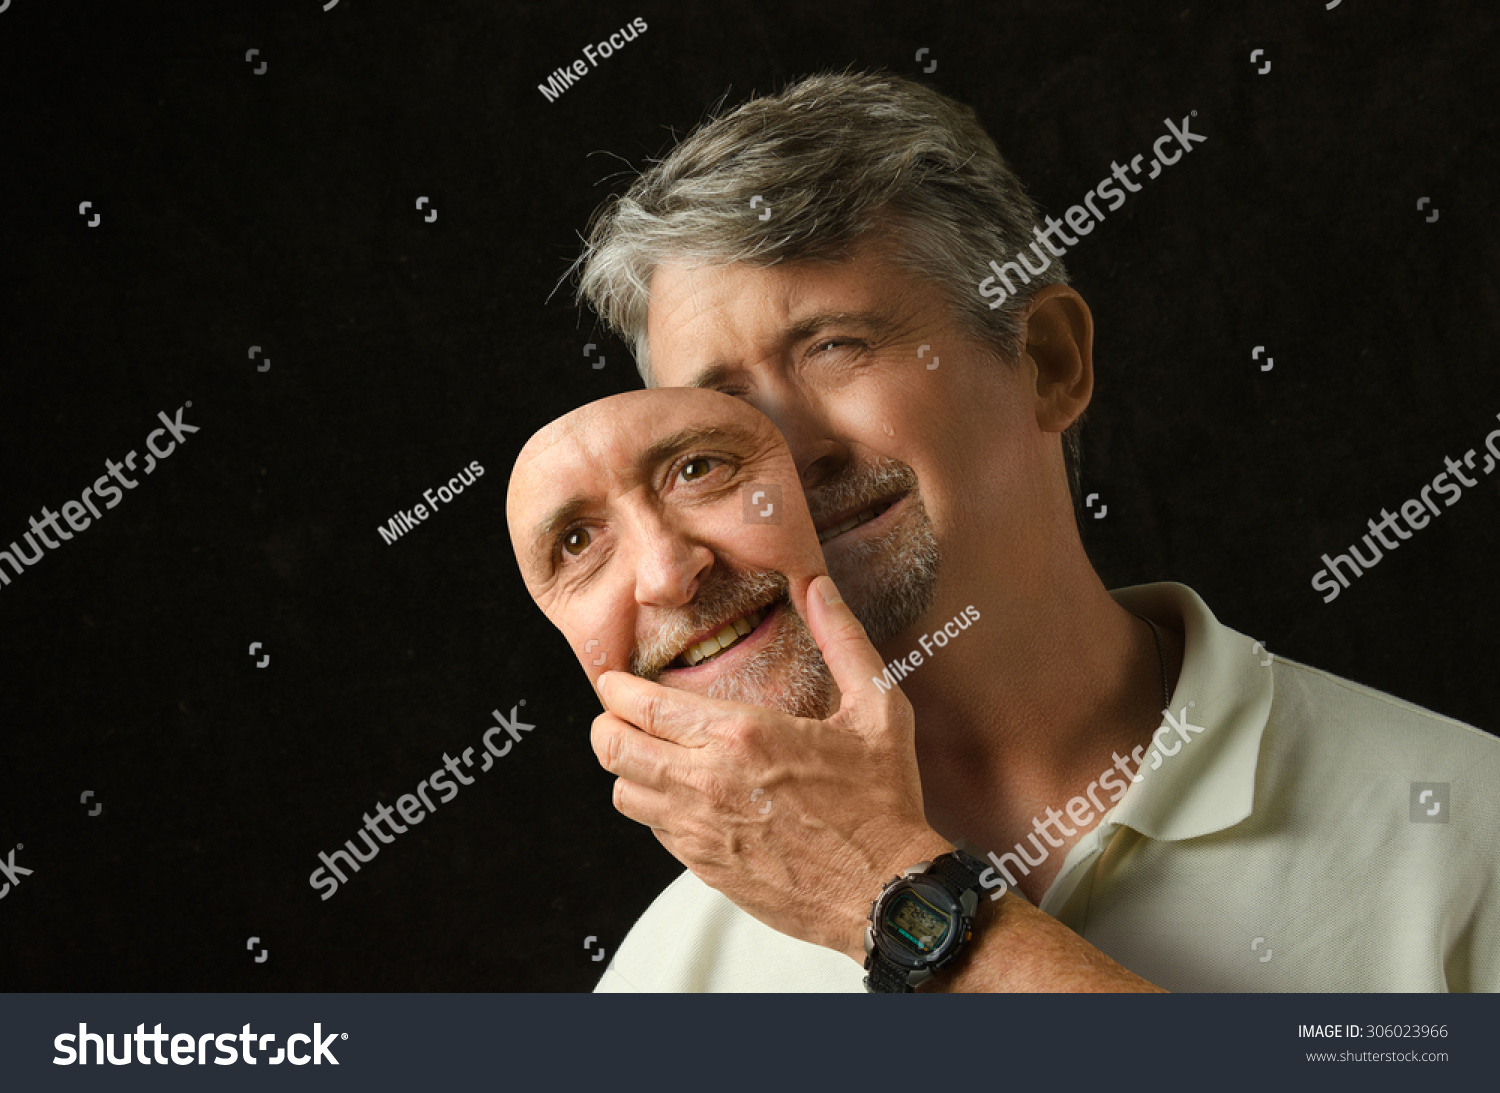 stock-photo-a-crying-depressed-bipolar-disorder-man-is-trying-to-hide-his-tears-with-a-fake-smile-happiness-306023966.jpg